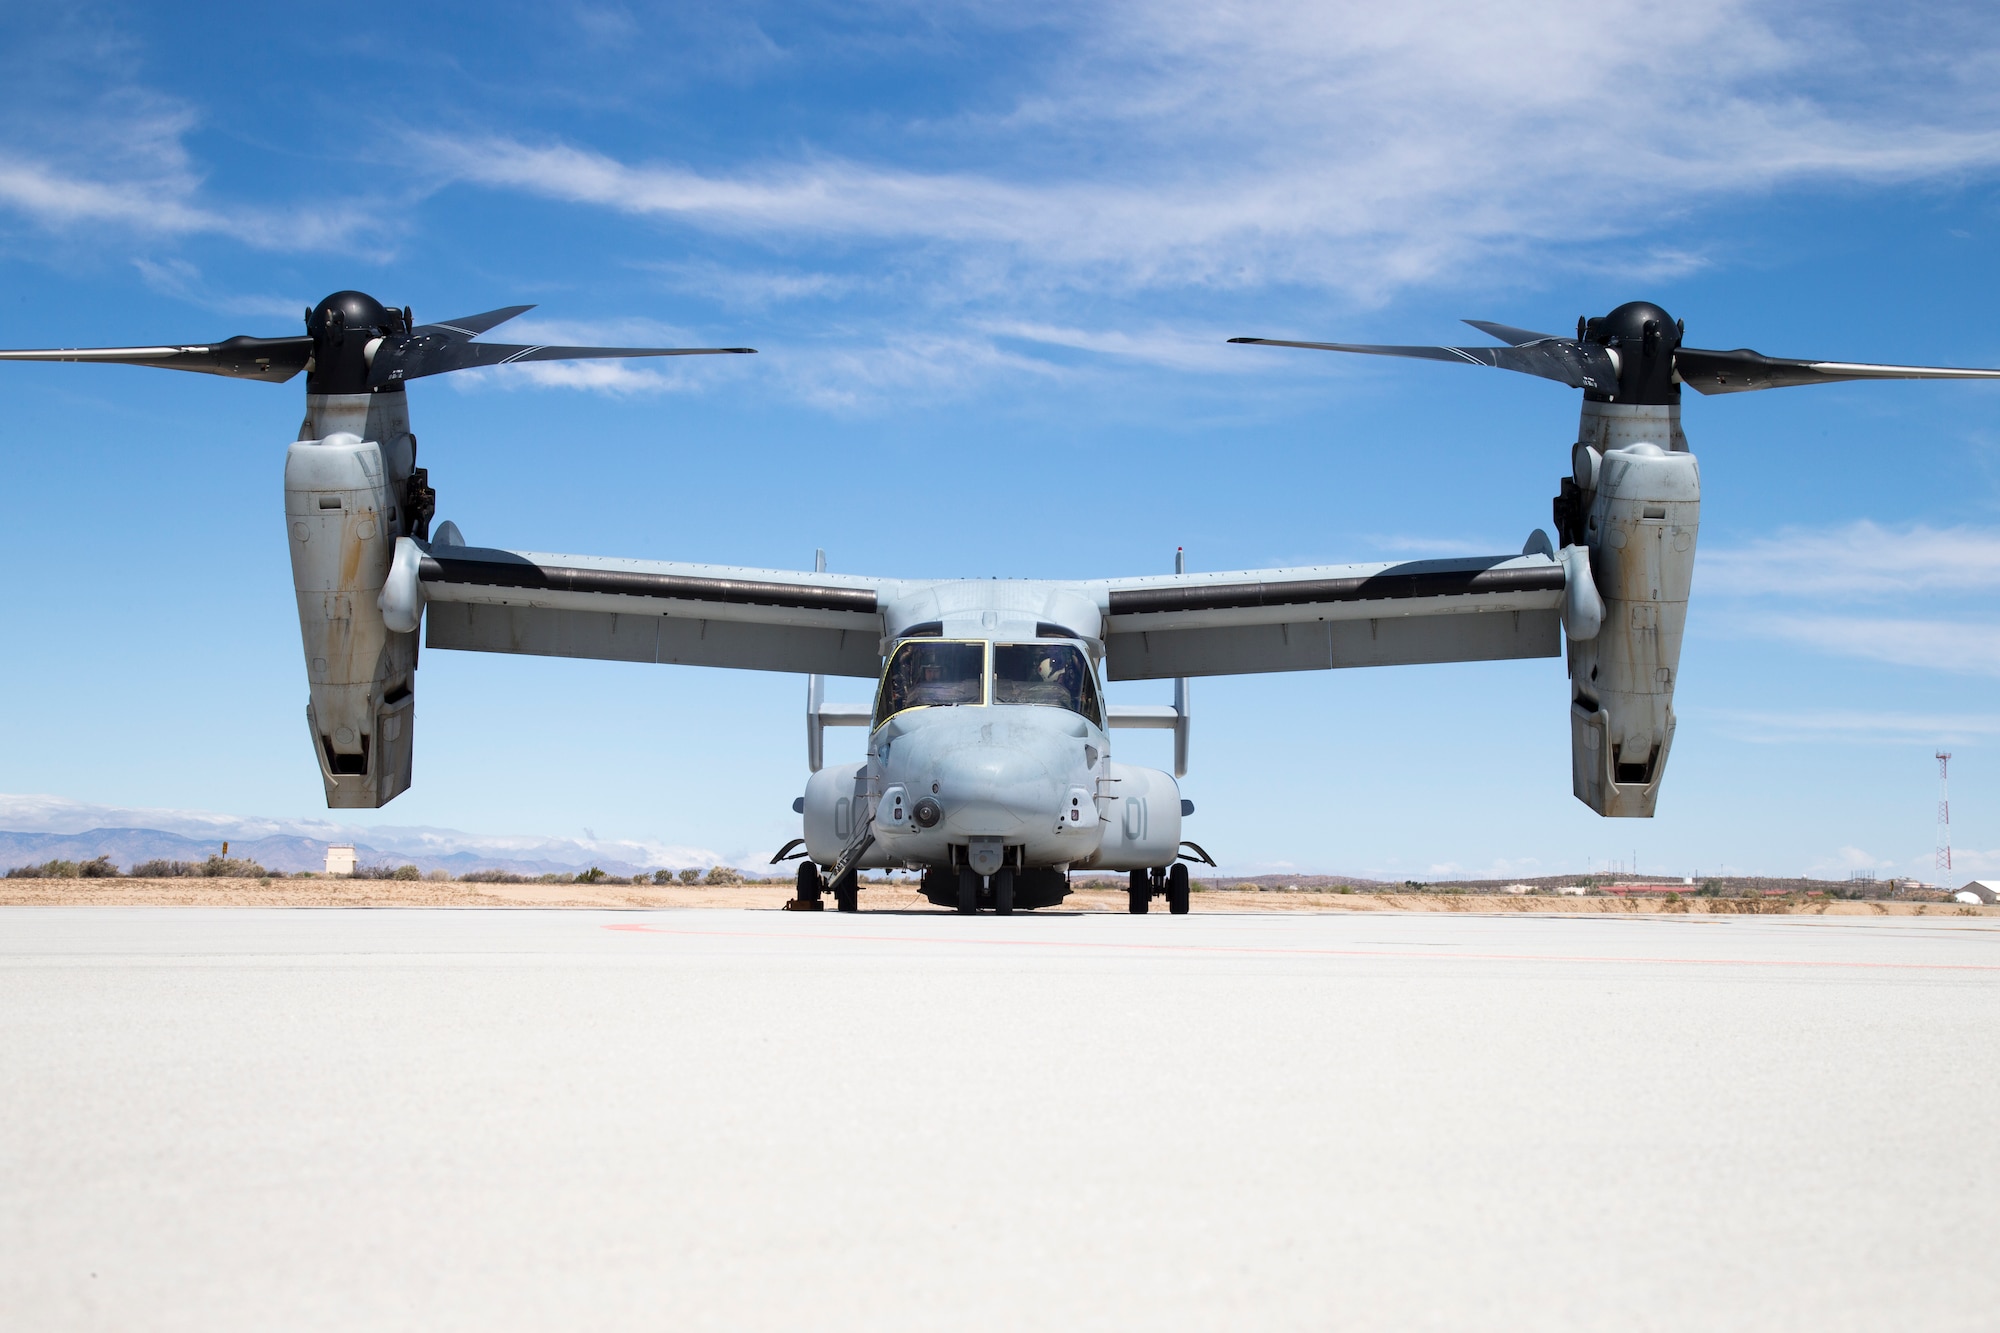 The MV-22B Osprey is a tiltrotor vertical and/or short take-off and landing aircraft that serves as the medium-lift assault support aircraft for the Marines. The Osprey can operate as a helicopter or a turboprop aircraft. It can transport troops, equipment and supplies from ships and land bases for combat assault and support. Edwards AFB hasn’t seen an Osprey in the skies regularly since 2007. That’s the year the 418th Flight Test Squadron said goodbye to the CV-22 Integrated Test Team after completing developmental test of the aircraft. (U.S. Air Force photo by Chris Higgins) 
